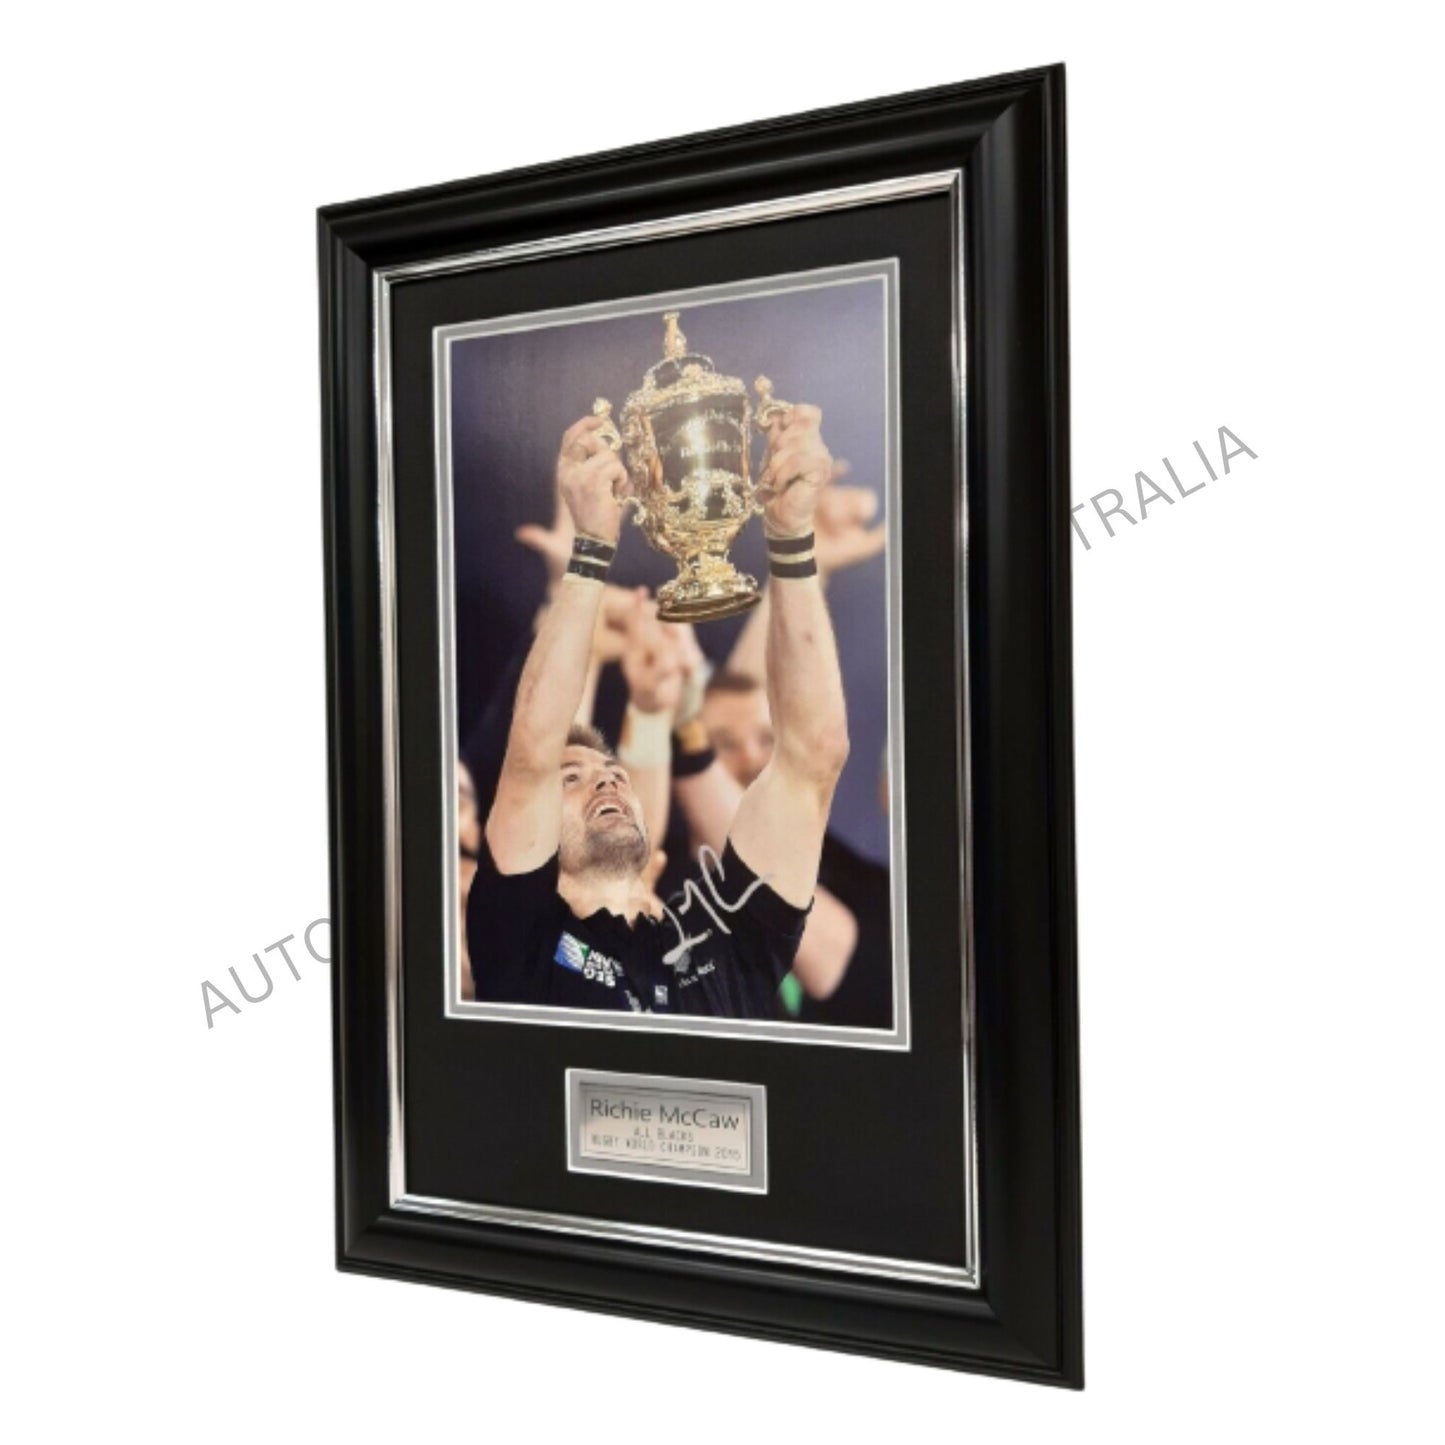 RICHIE MCCAW ALL BLACKS RUGBY World Cup 2015 Signed Photo Framed Memorabilia